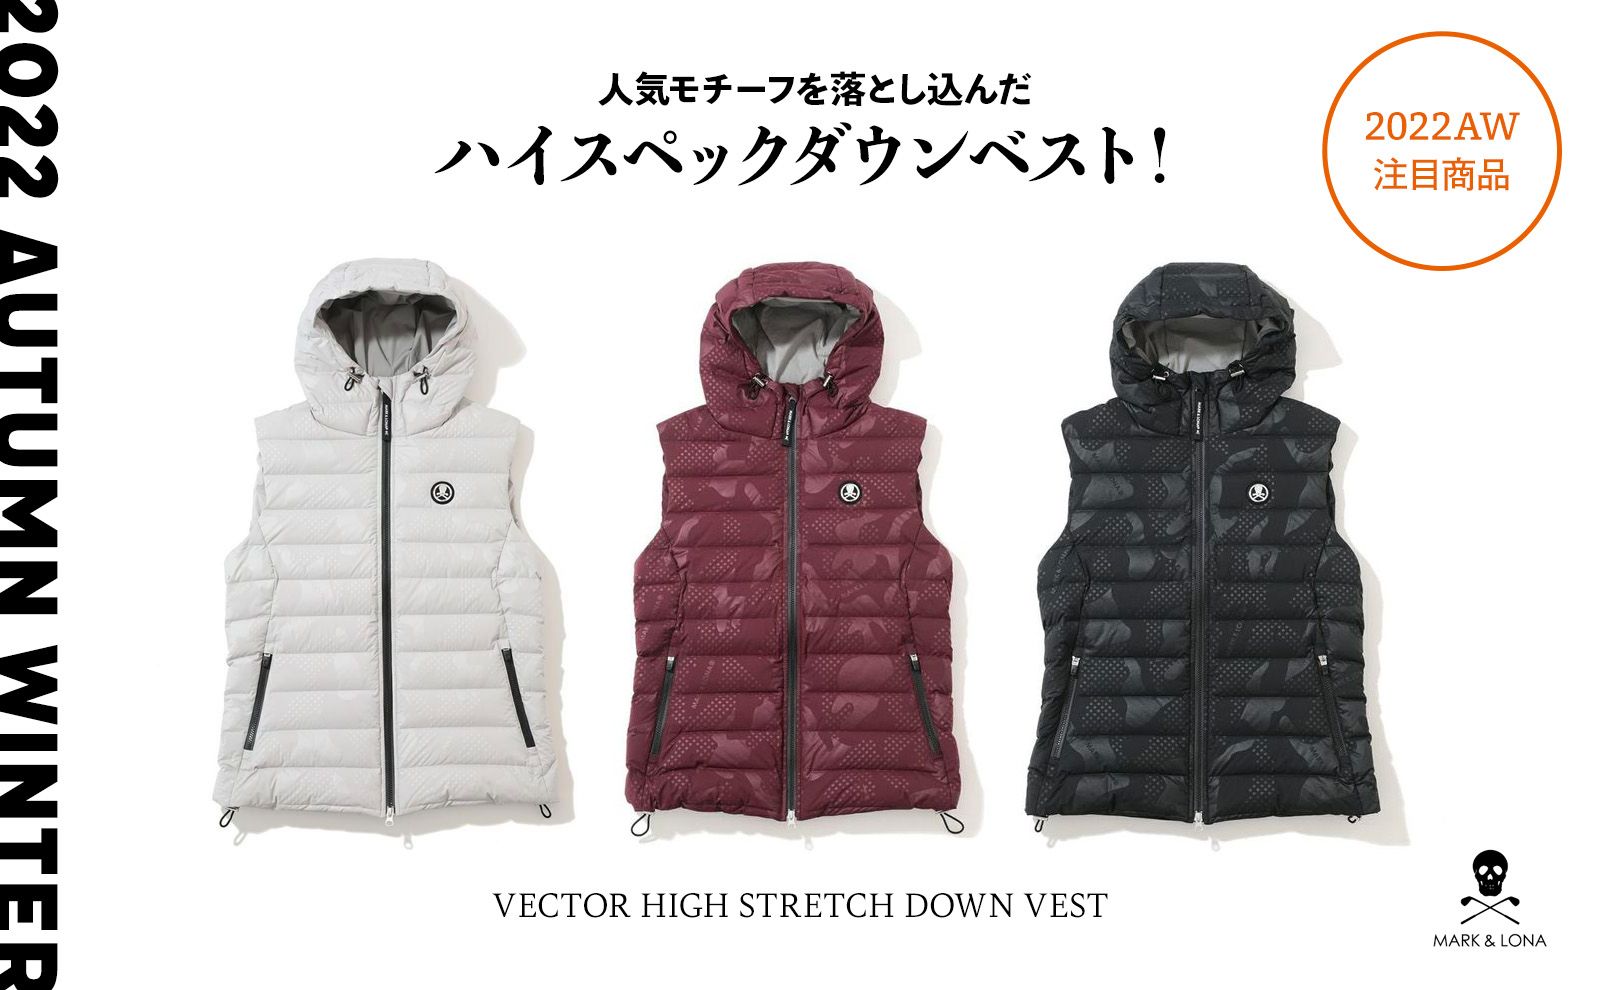 MARK&LONA - VECTOR HIGH STRETCH DOWN VEST / ベクターカモ ハイ